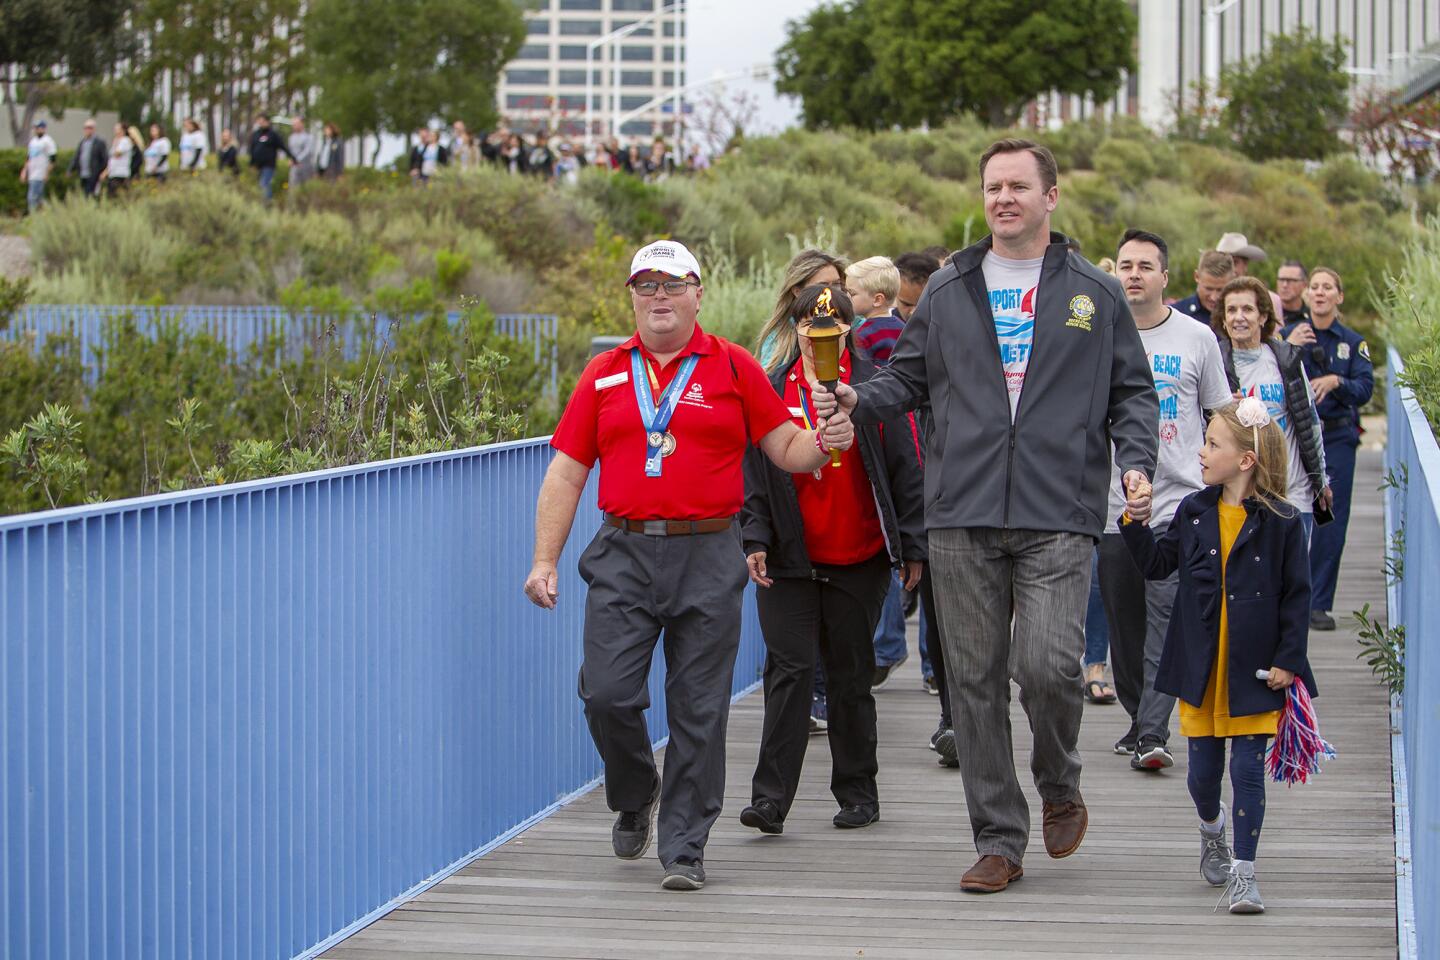 Newport Beach Mayor Pro Tem Will O'Neill carries a torch with Greg Kozlowski, Special Olympics Orange County Athlete of the Year, during a Unity Torch Walk around Newport's Civic Center Park on Thursday to raise funds for local Special Olympics participants.